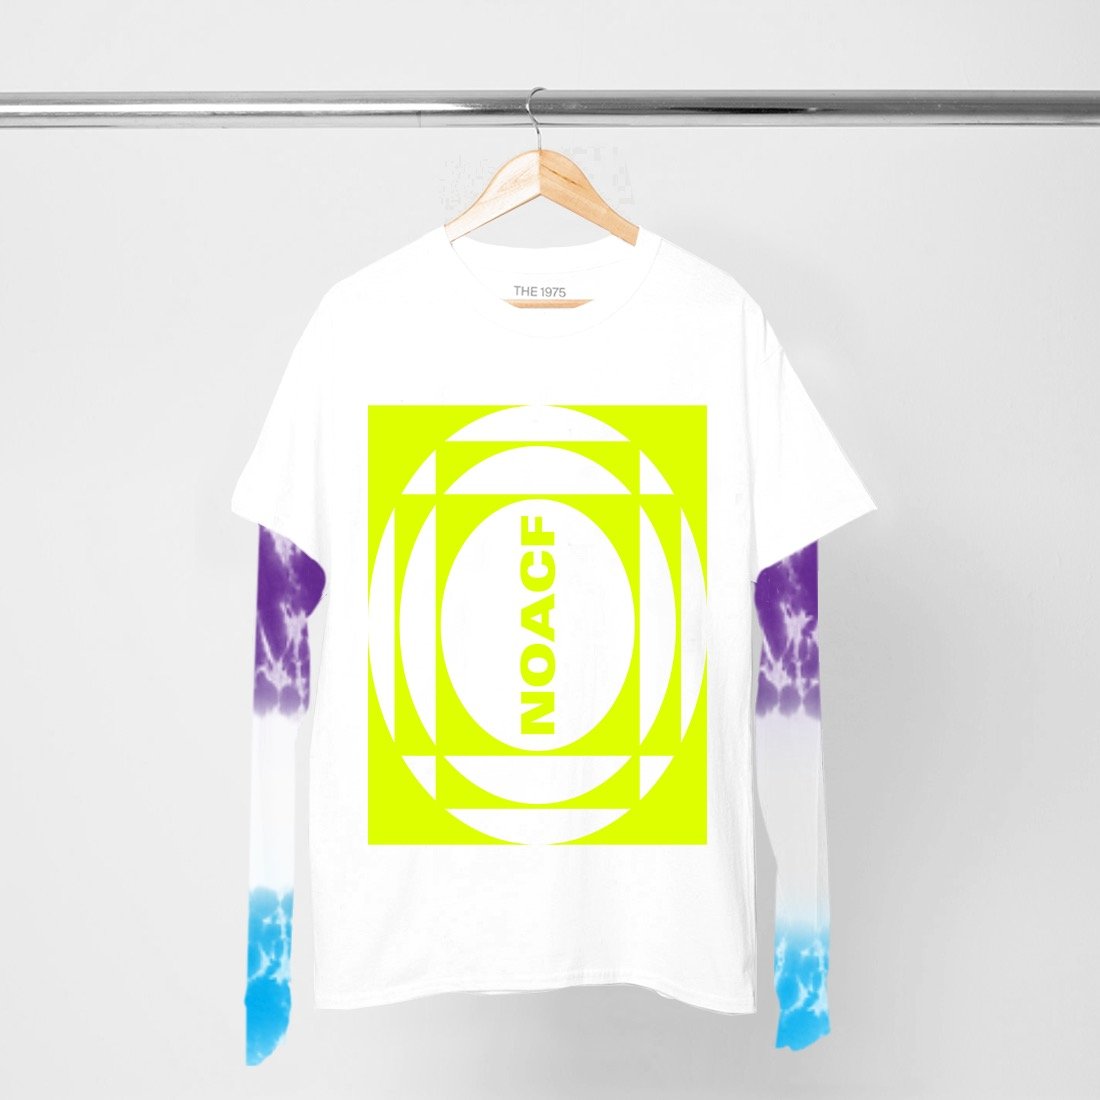 NOACF Neon Inverted Tie Dye Layered LS T-Shirt I – The 1975